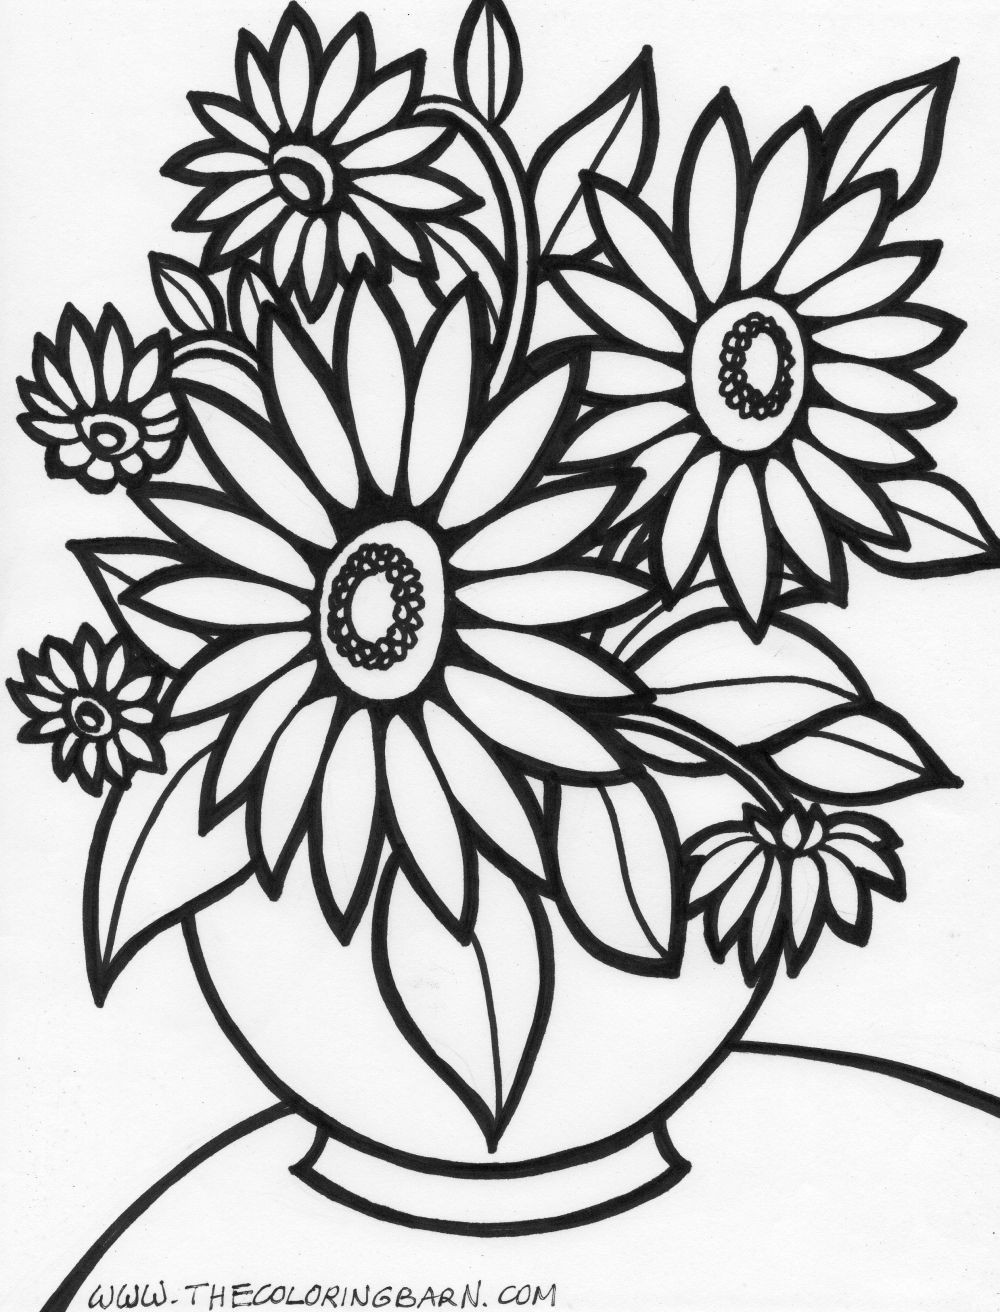 Artful Flower Coloring Sheets For Girls Flowers
 Rose Flower Coloring Pages For Girls For Flower Coloring